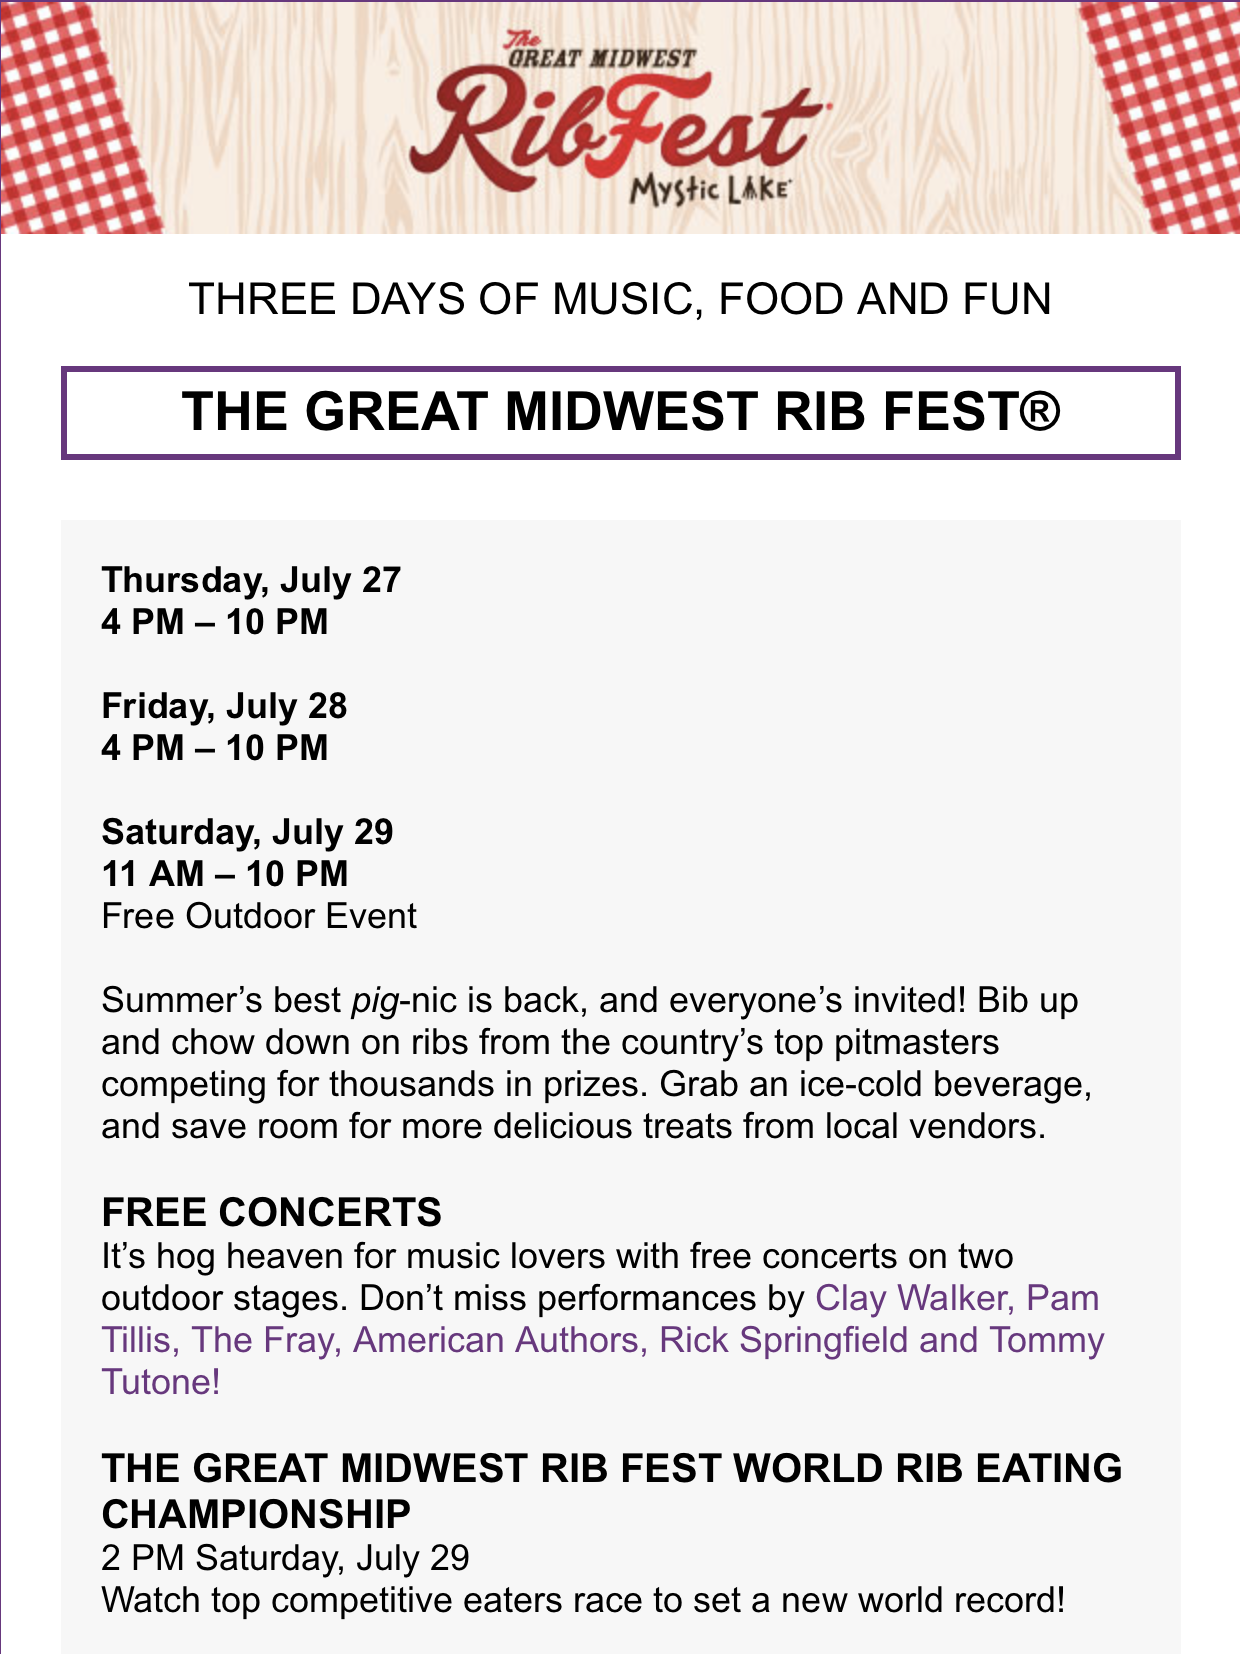 Screenshot of the 2023 RibFest announcement email with times each day (4pm-10pm on Thursday and Friday, 11am-10pm on Saturday), plus info on the free concerts and rib eating championship. Artists to perform include Clay Walker, Pam Willis, The Fray, American Authors, Rick Springfield and Tommy Tutone